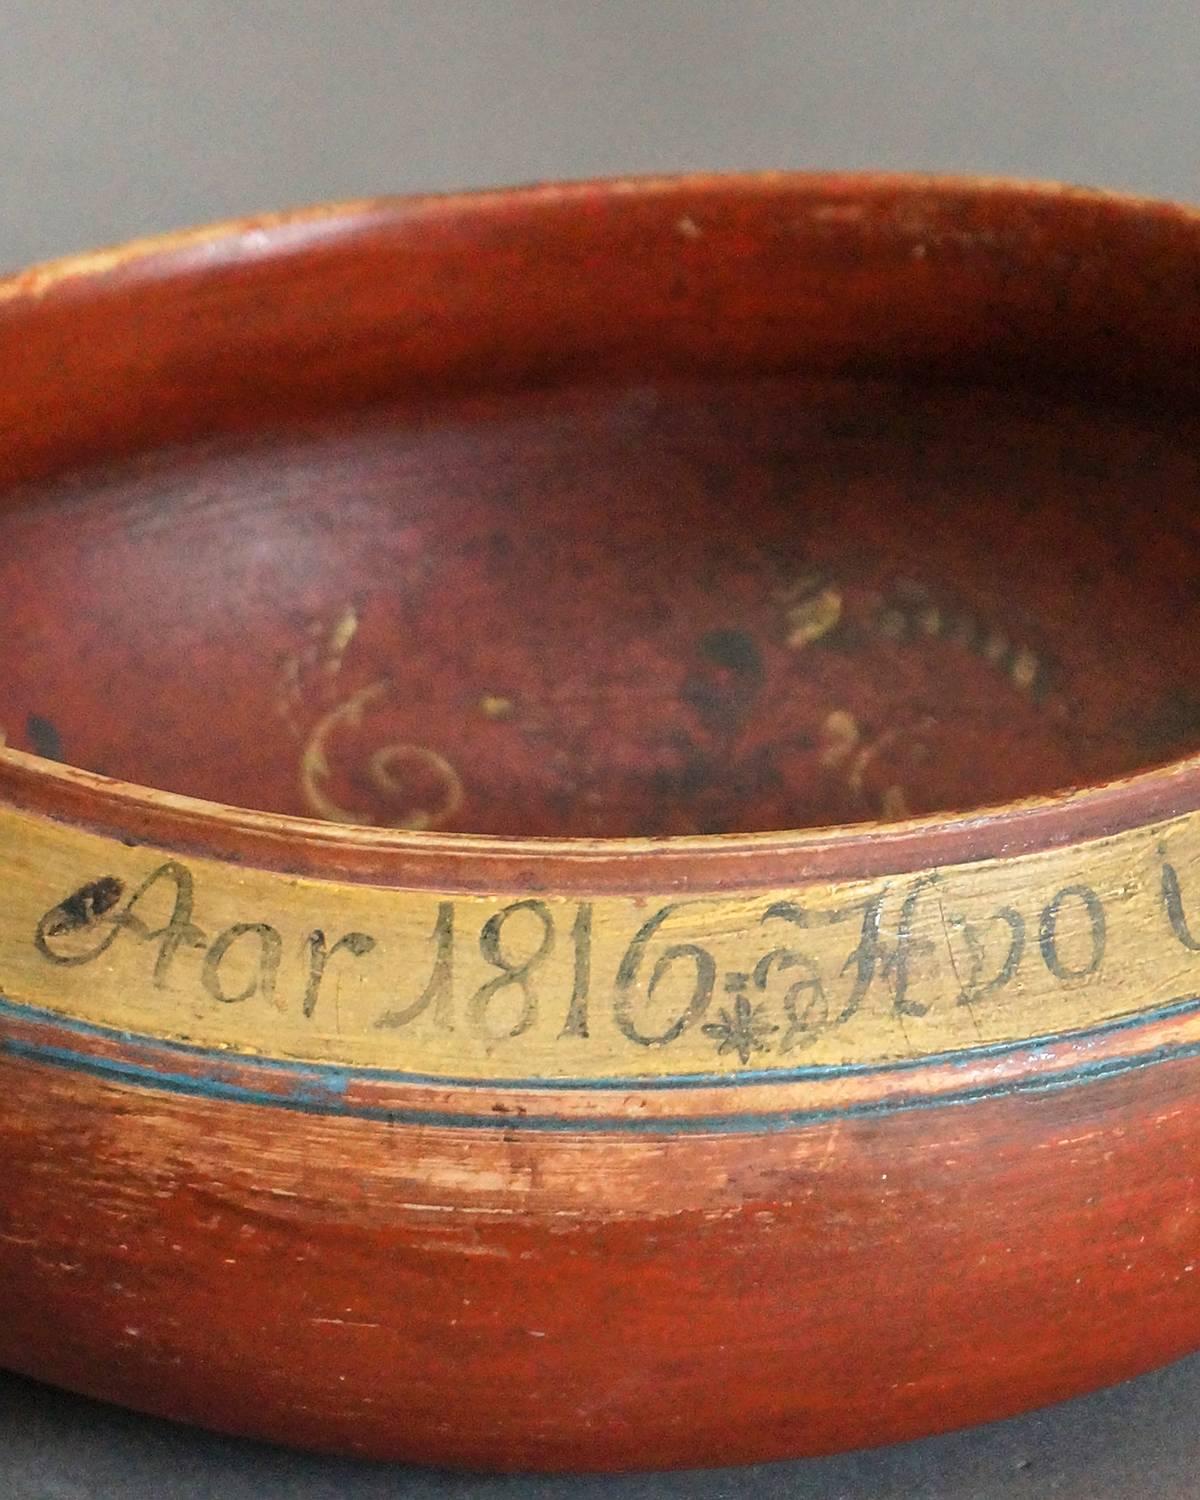 Turned wooden drinking bowl from Denmark painted a rich salmon and dated 1816. Around the rim is inscribed a verse translated as “He will not gather, but always drink! Wealth in the world he will not have. Year 1816.”  The interior is decorated with